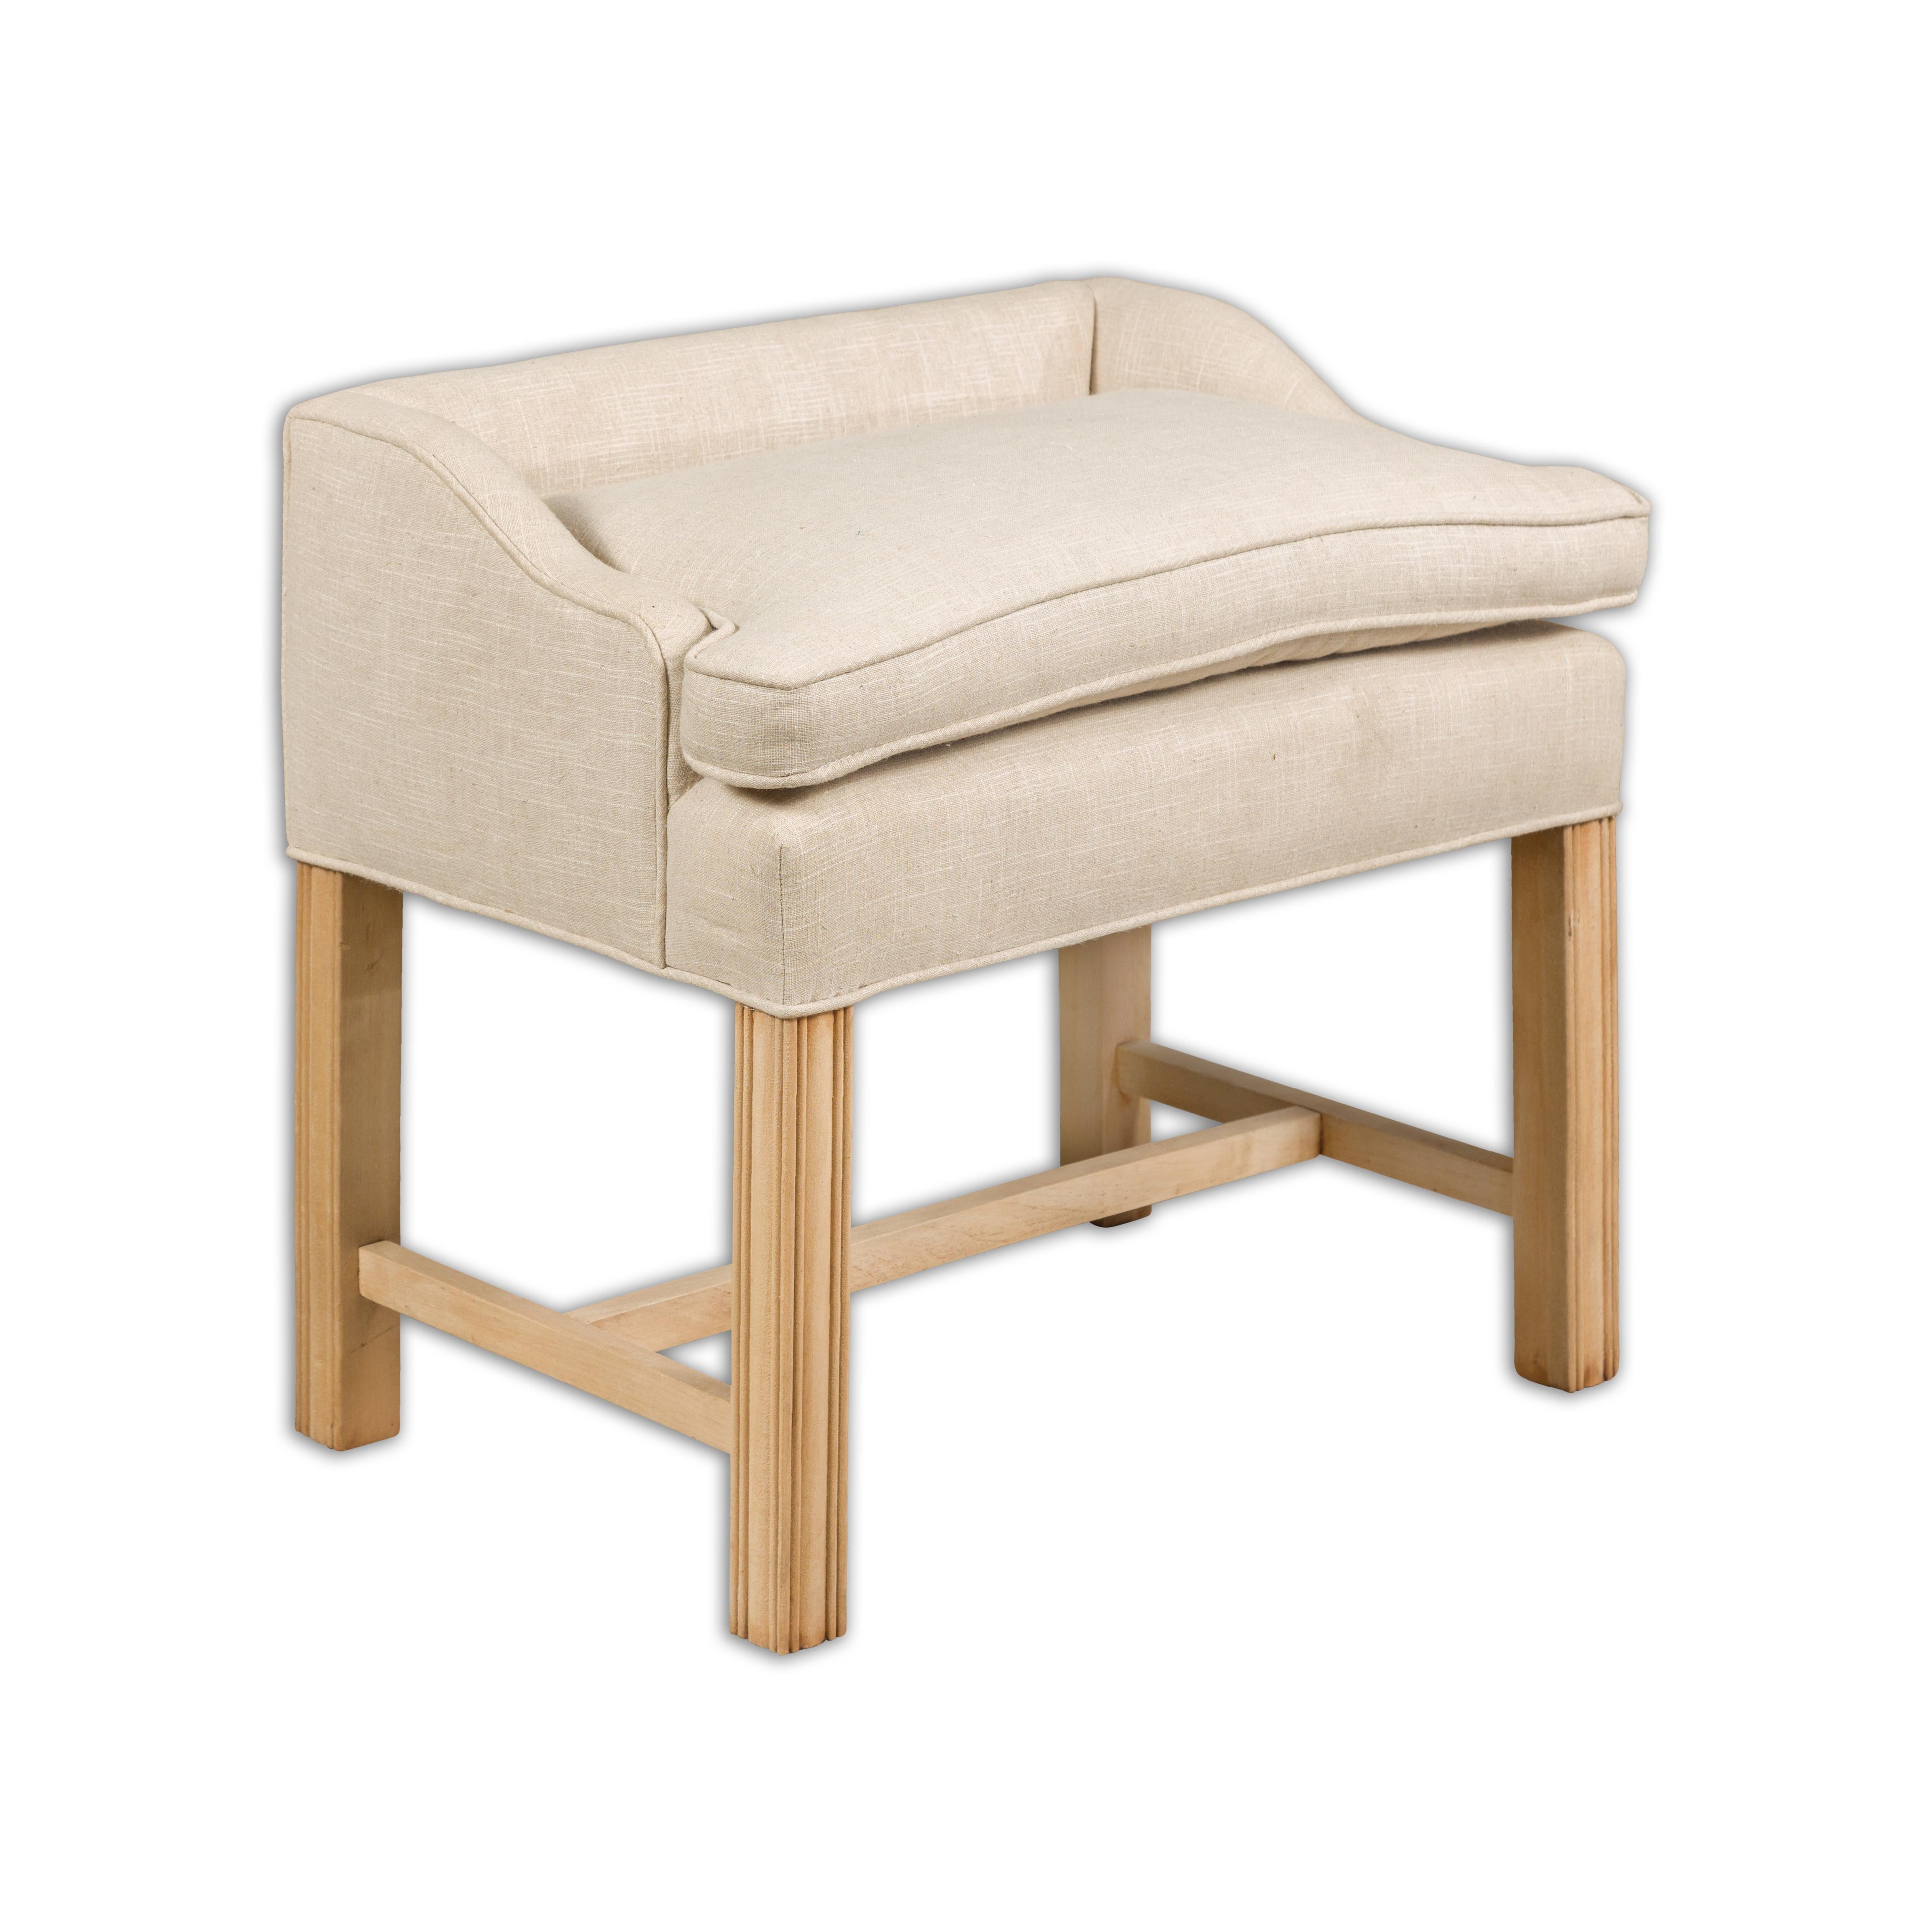 An English stool from circa 1920 with slightly raised back, straight carved legs, H-Form cross stretcher and newly reupholstered seat in linen. Introducing a distinguished English stool, dating from circa 1920, that seamlessly marries classic design